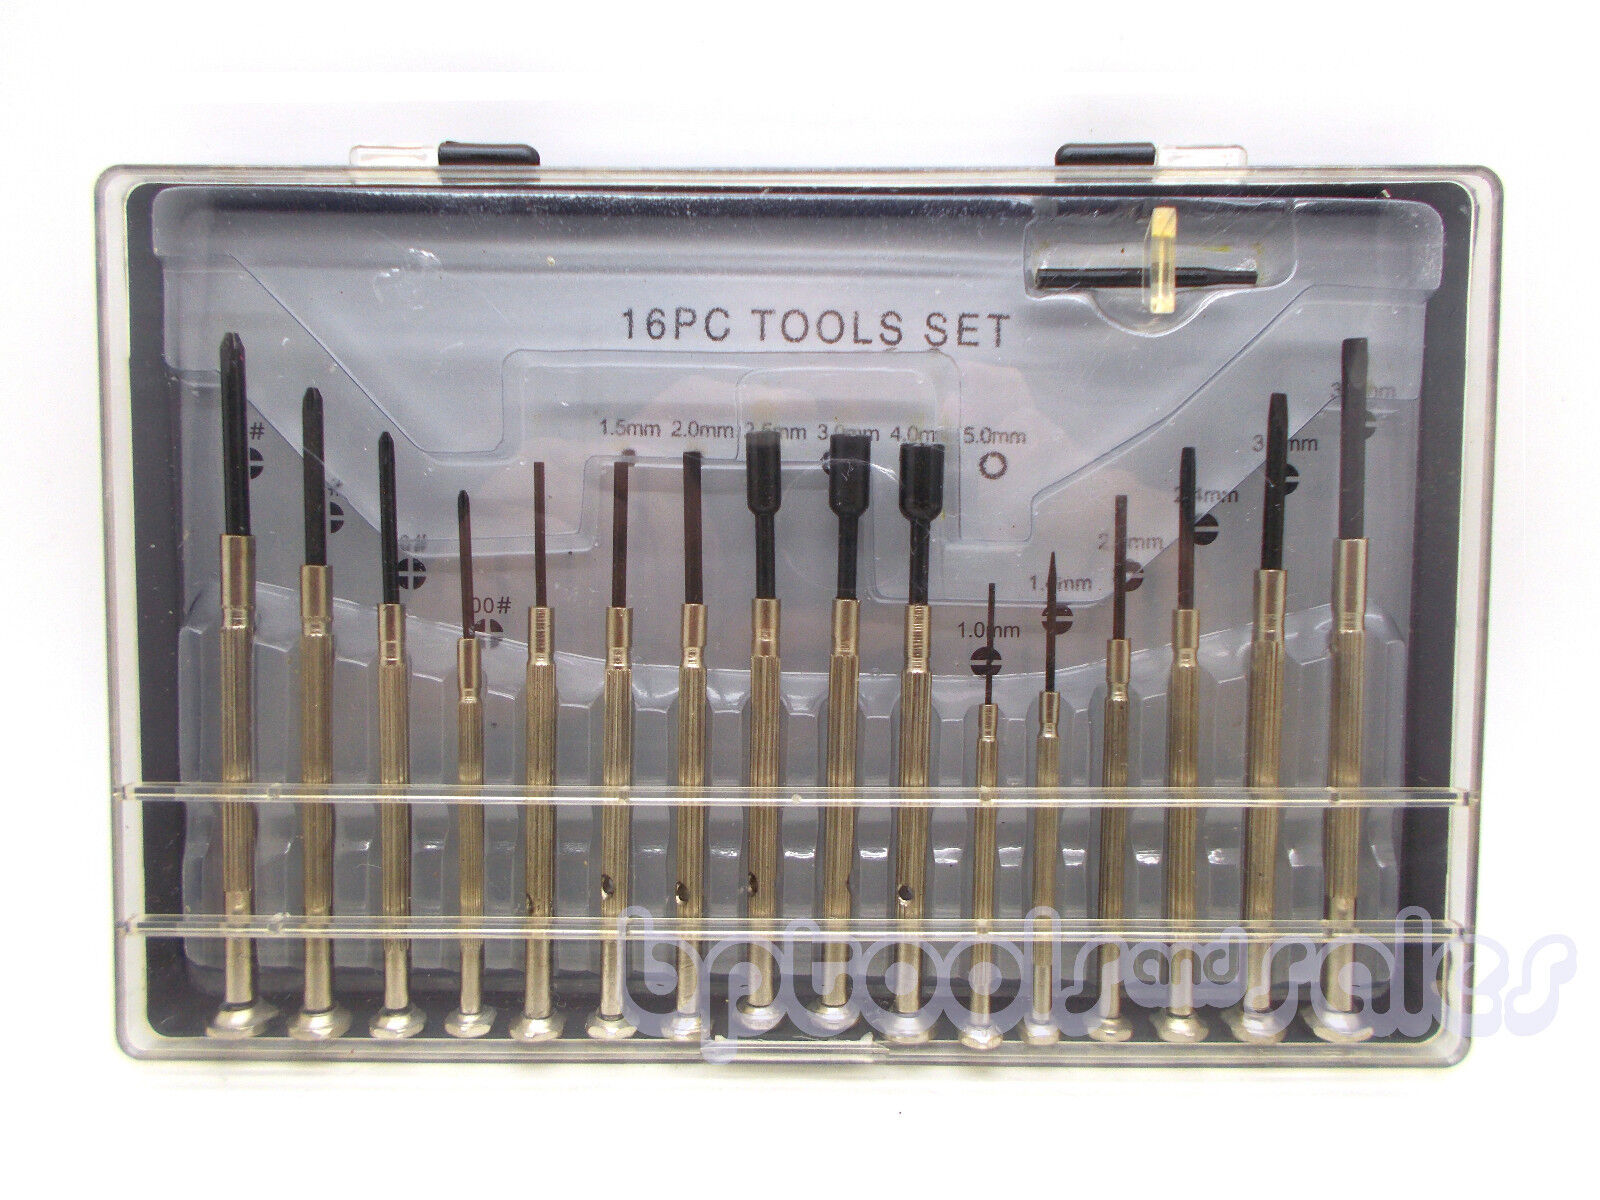 16pc Small Mini Precision Screwdriver Set for Watch Jewelry Electronic Repair Cal/AJ/APU Does Not Apply